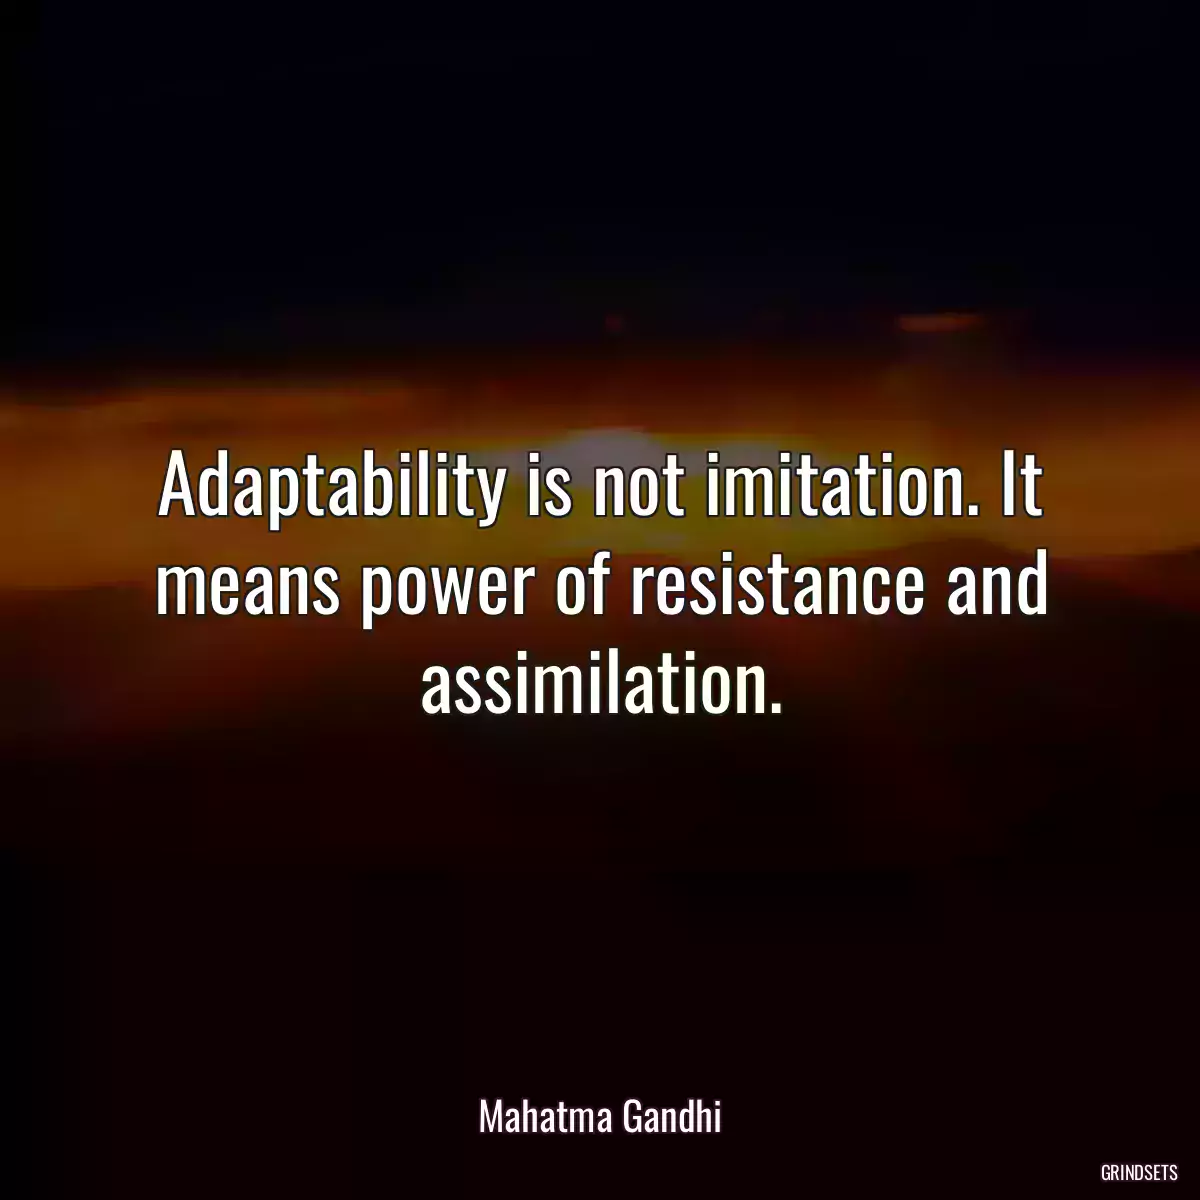 Adaptability is not imitation. It means power of resistance and assimilation.